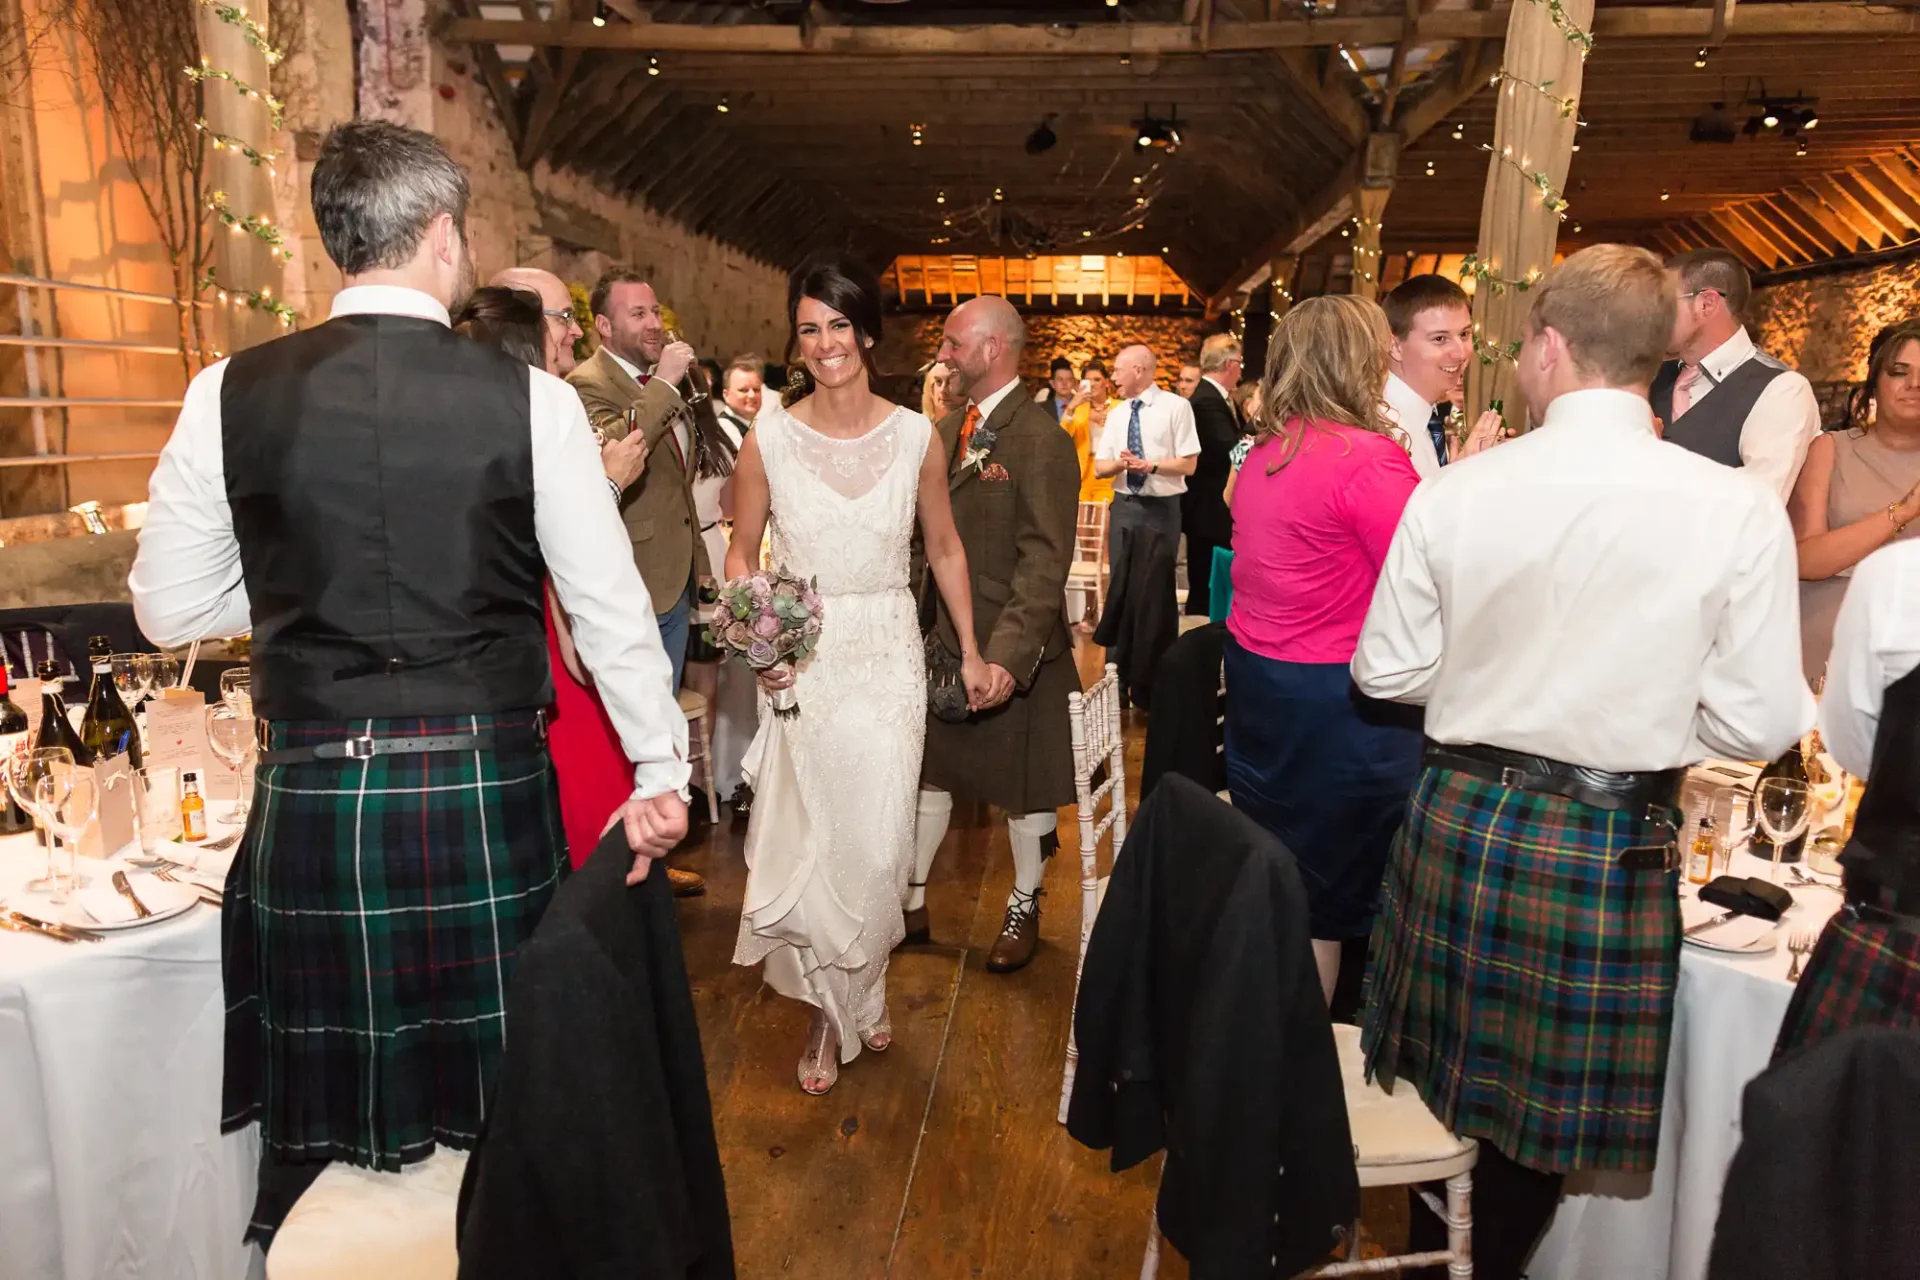 A bride and groom smiling as they walk through a crowd of guests at a rustic wedding reception, with many men wearing kilts.